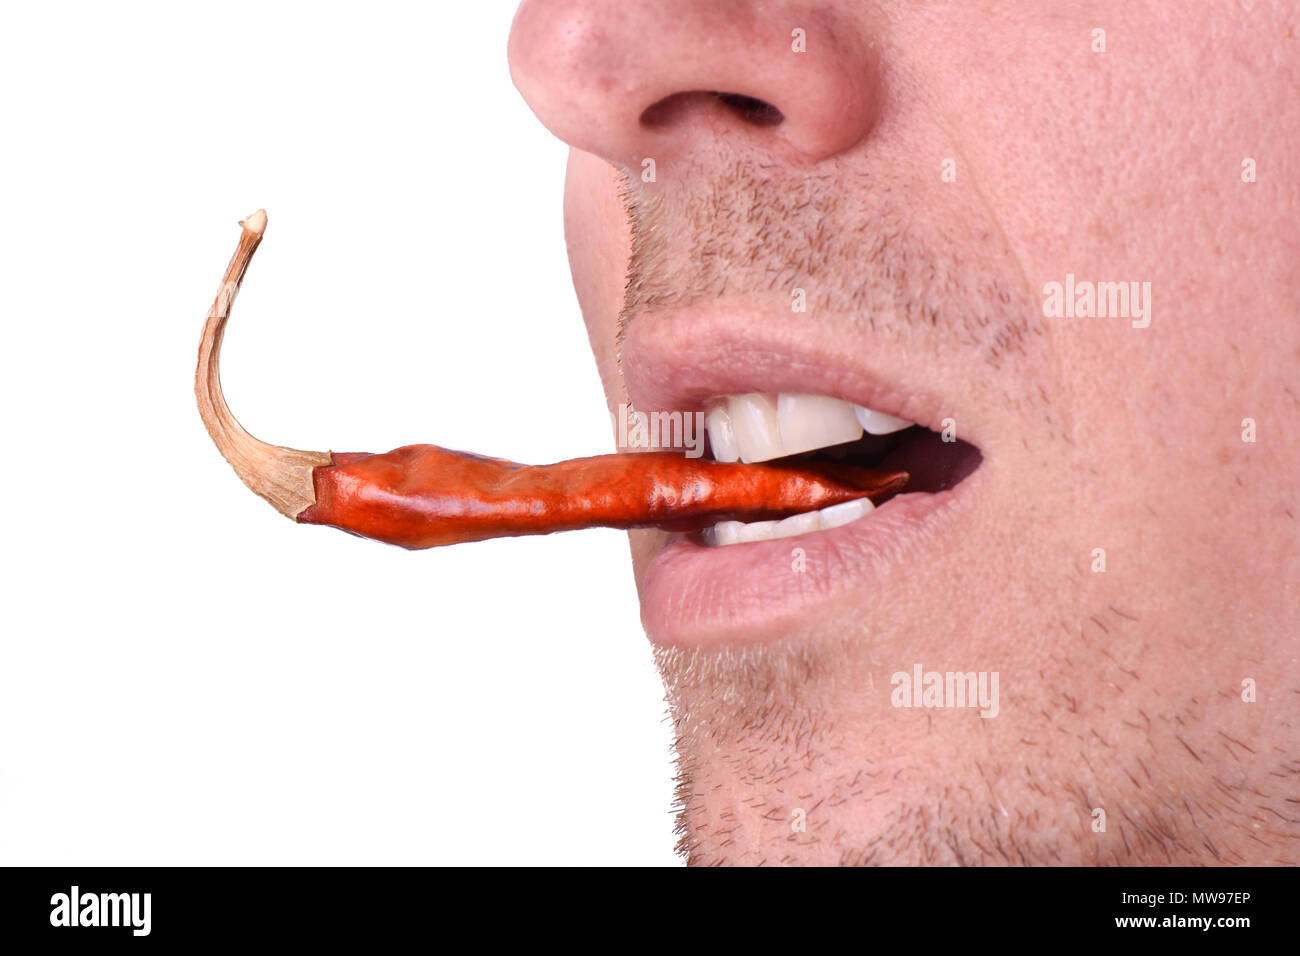 Bearded man eating a spicy red hot pepper on a white background Stock Photo